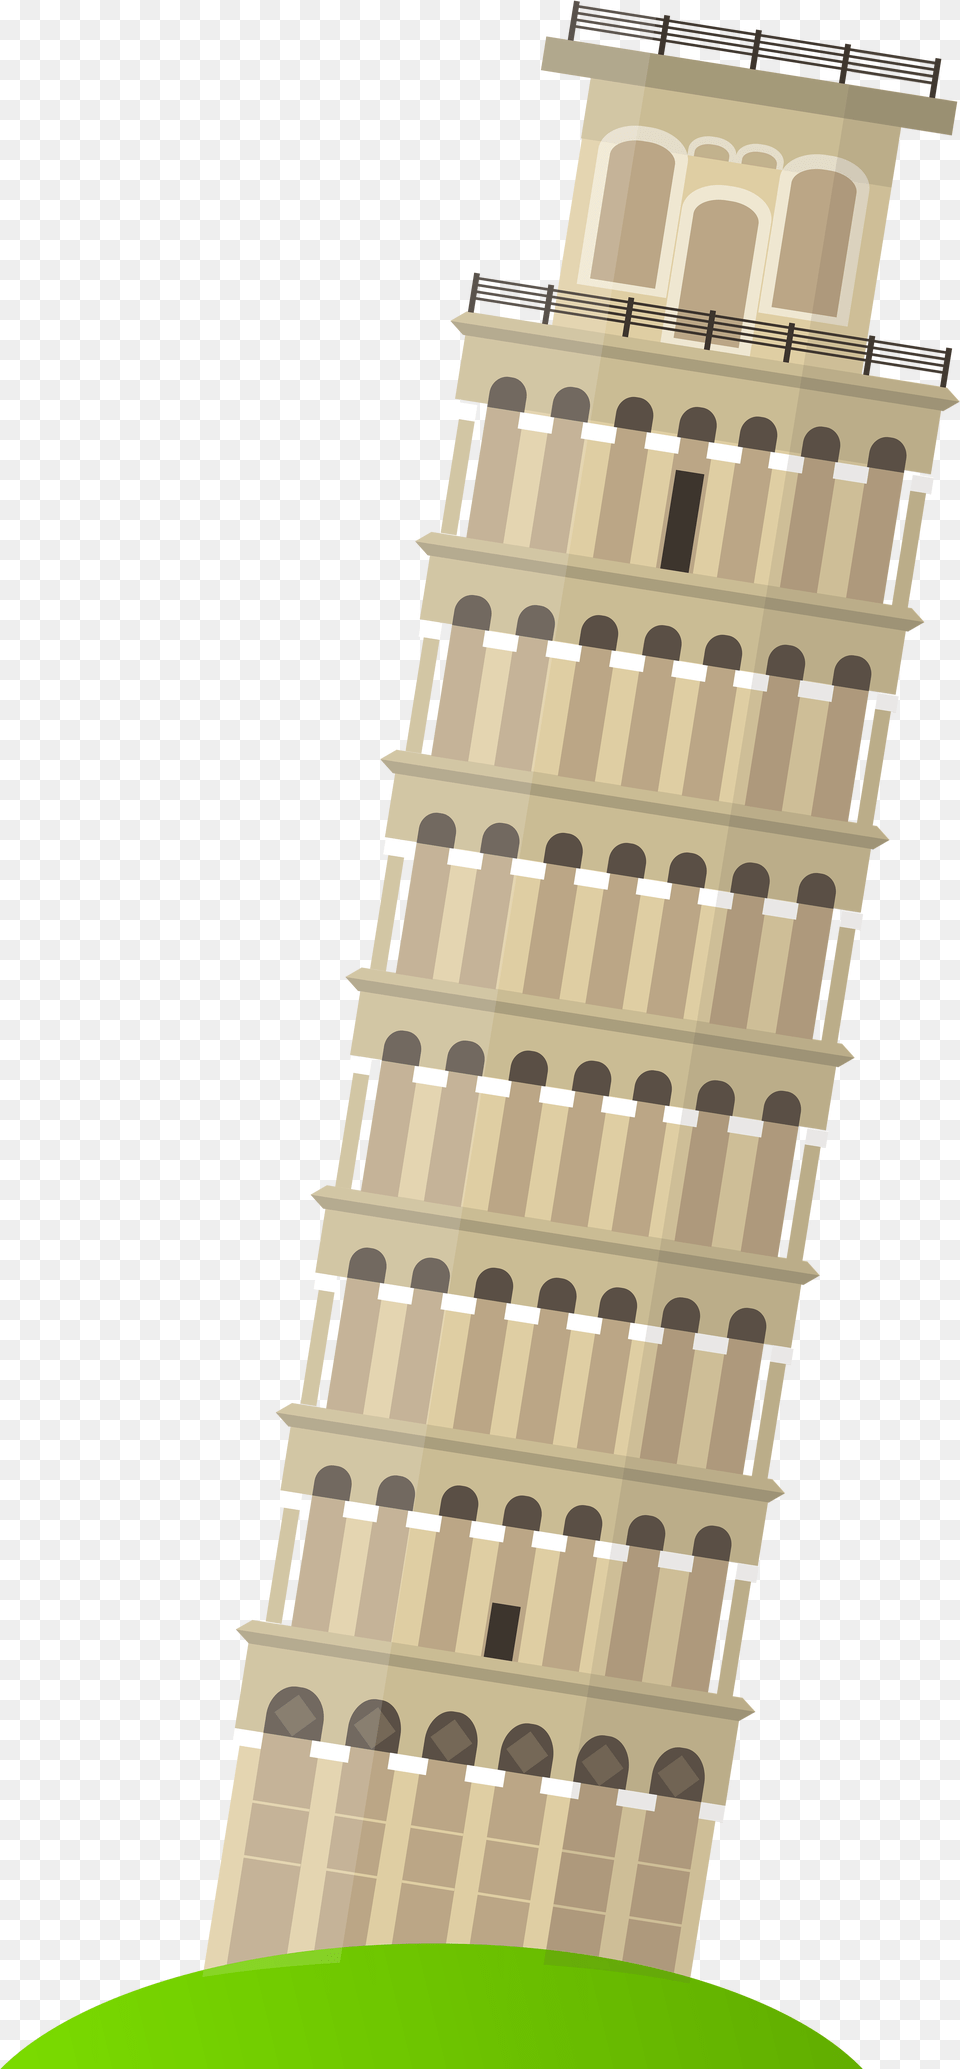 Leaning Tower Of Pisa Clip Art Leaning Tower Of Pisa Clipart, Urban, City, High Rise, Architecture Free Transparent Png